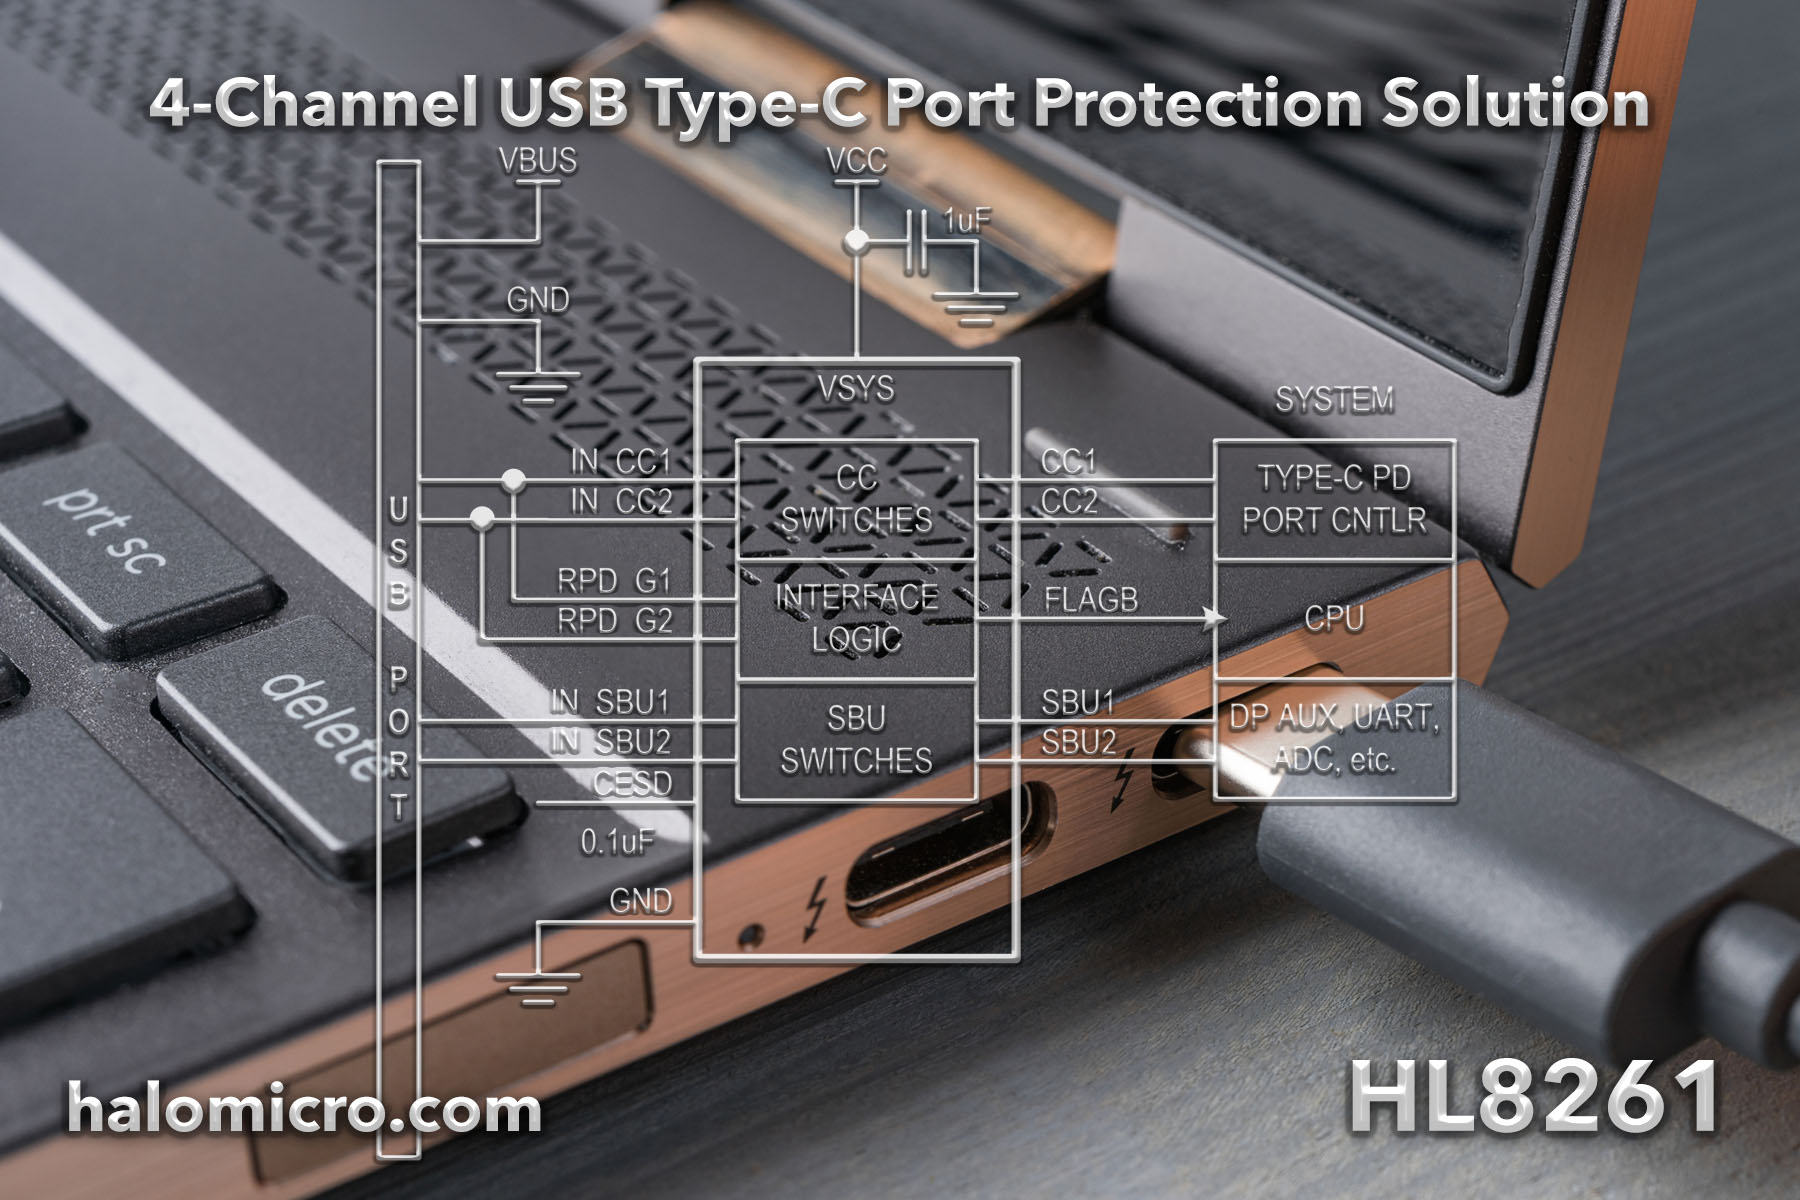 Halo Microelectronics Introduces 4-Channel USB Type-C Port Protection Solution